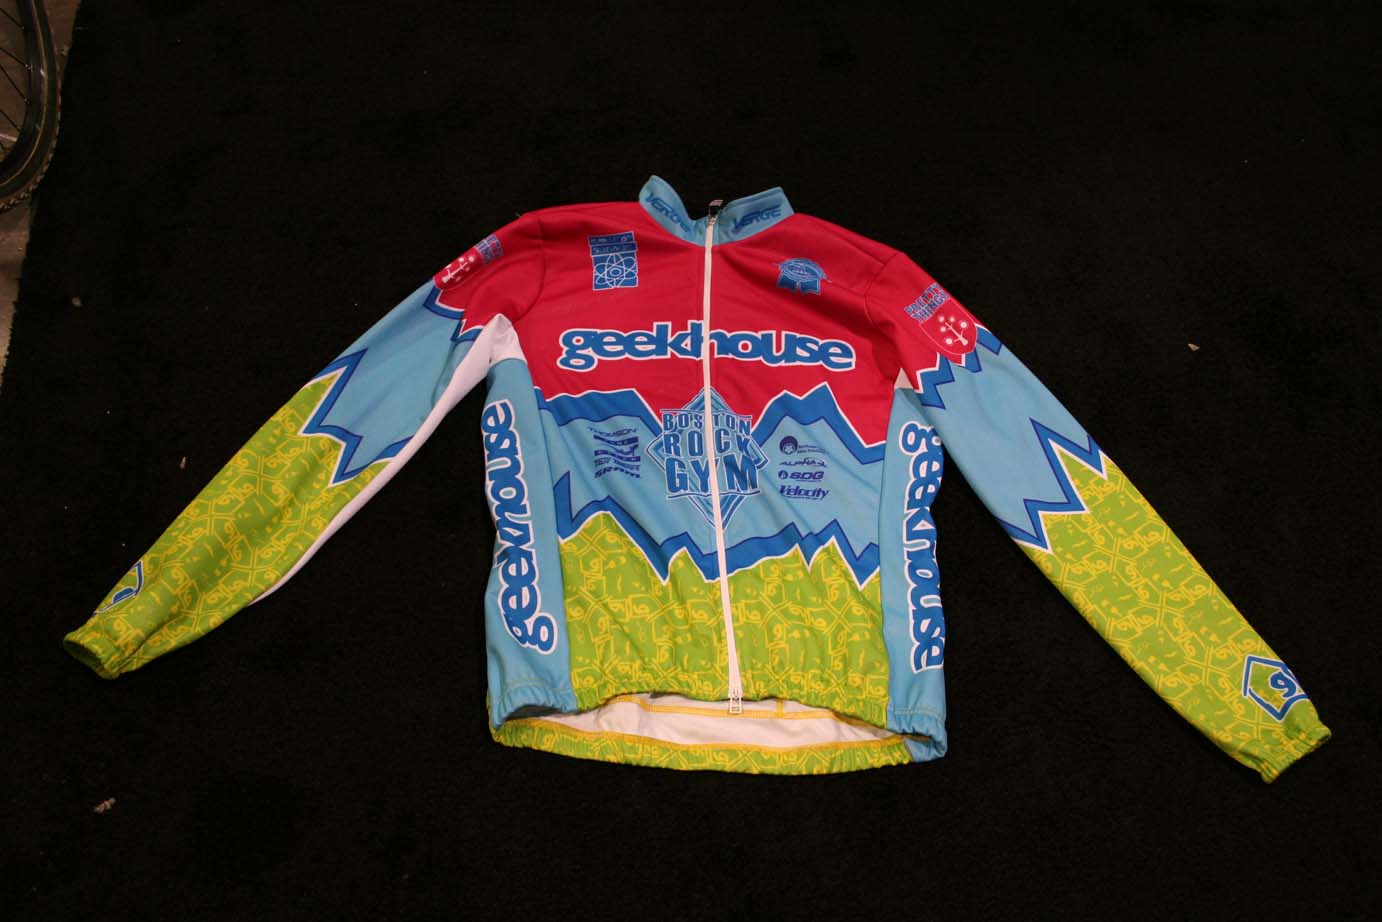 The Geekhouse team jersey: pretty hard to miss at a 'cross race. ?Cyclocross Magazine